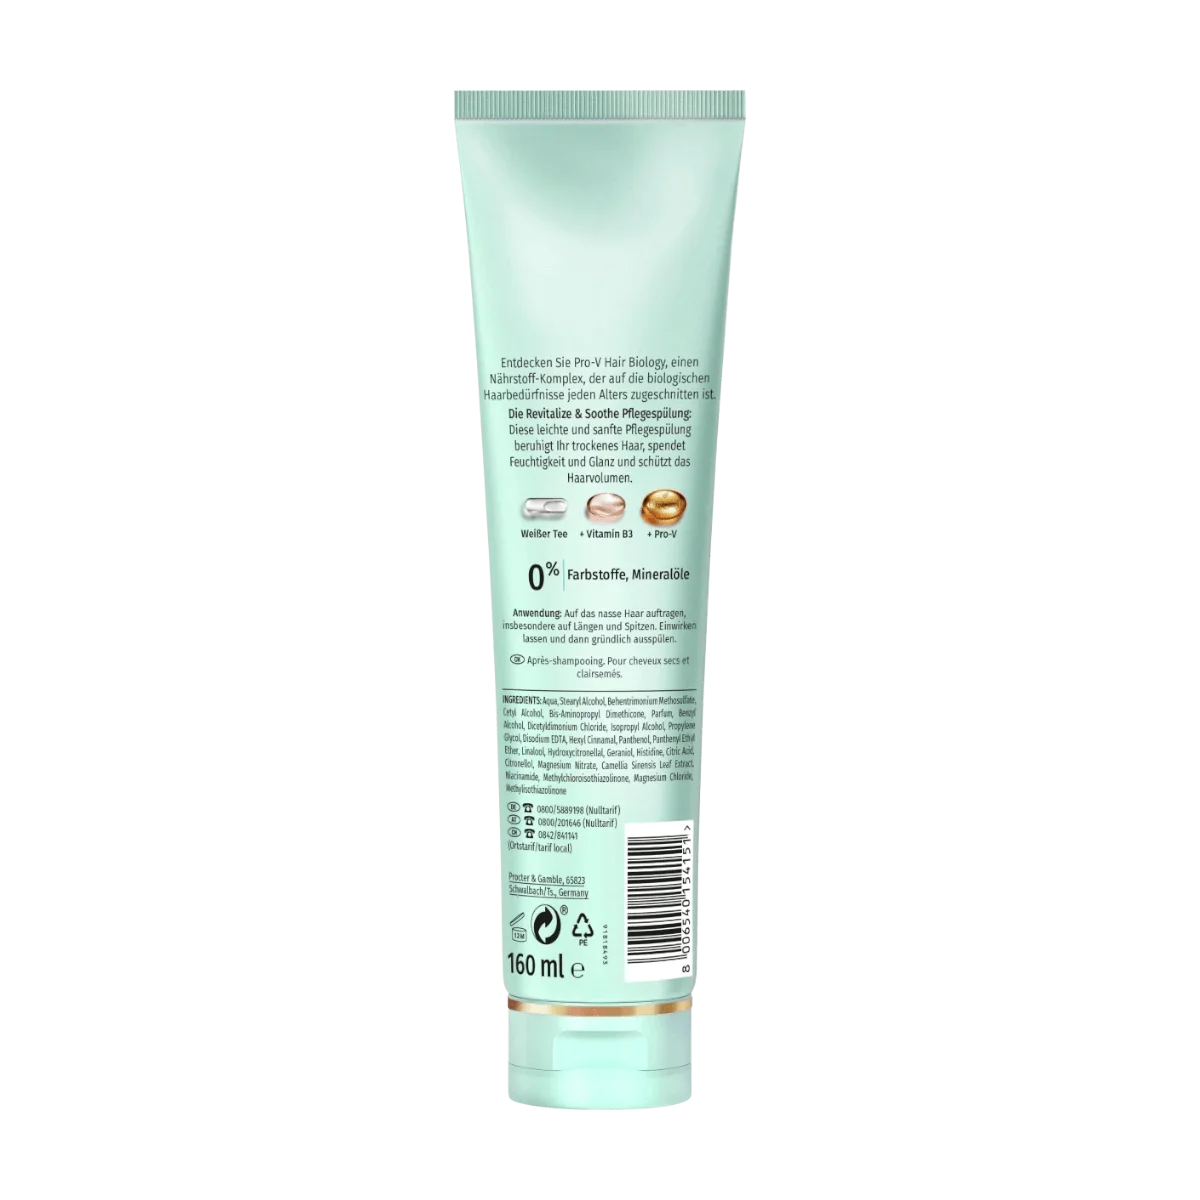 hair biology Conditioner Revitalize & Soothe, 160 ml